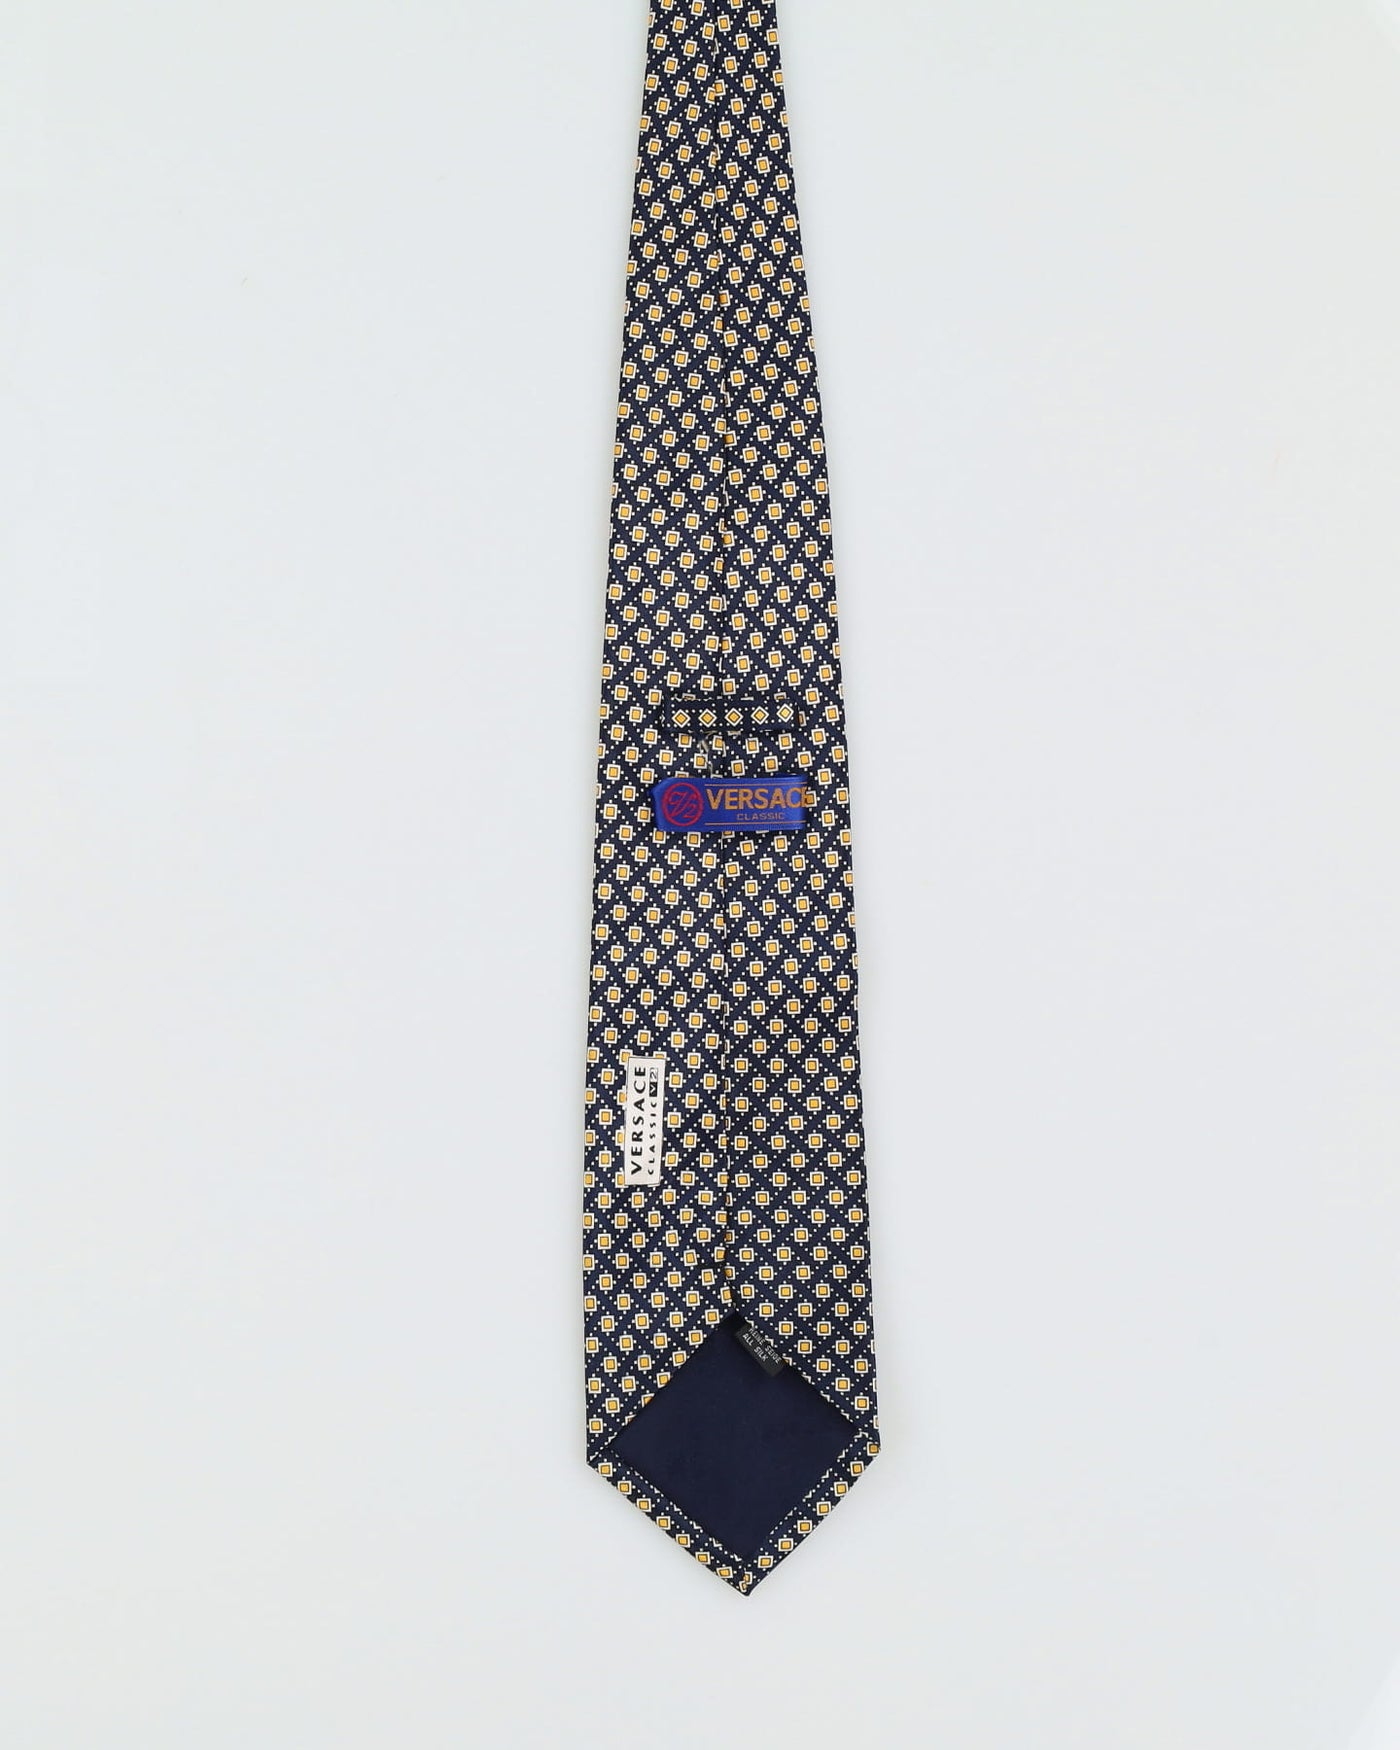 Vintage 90s Versace Classic Navy Patterned Tie